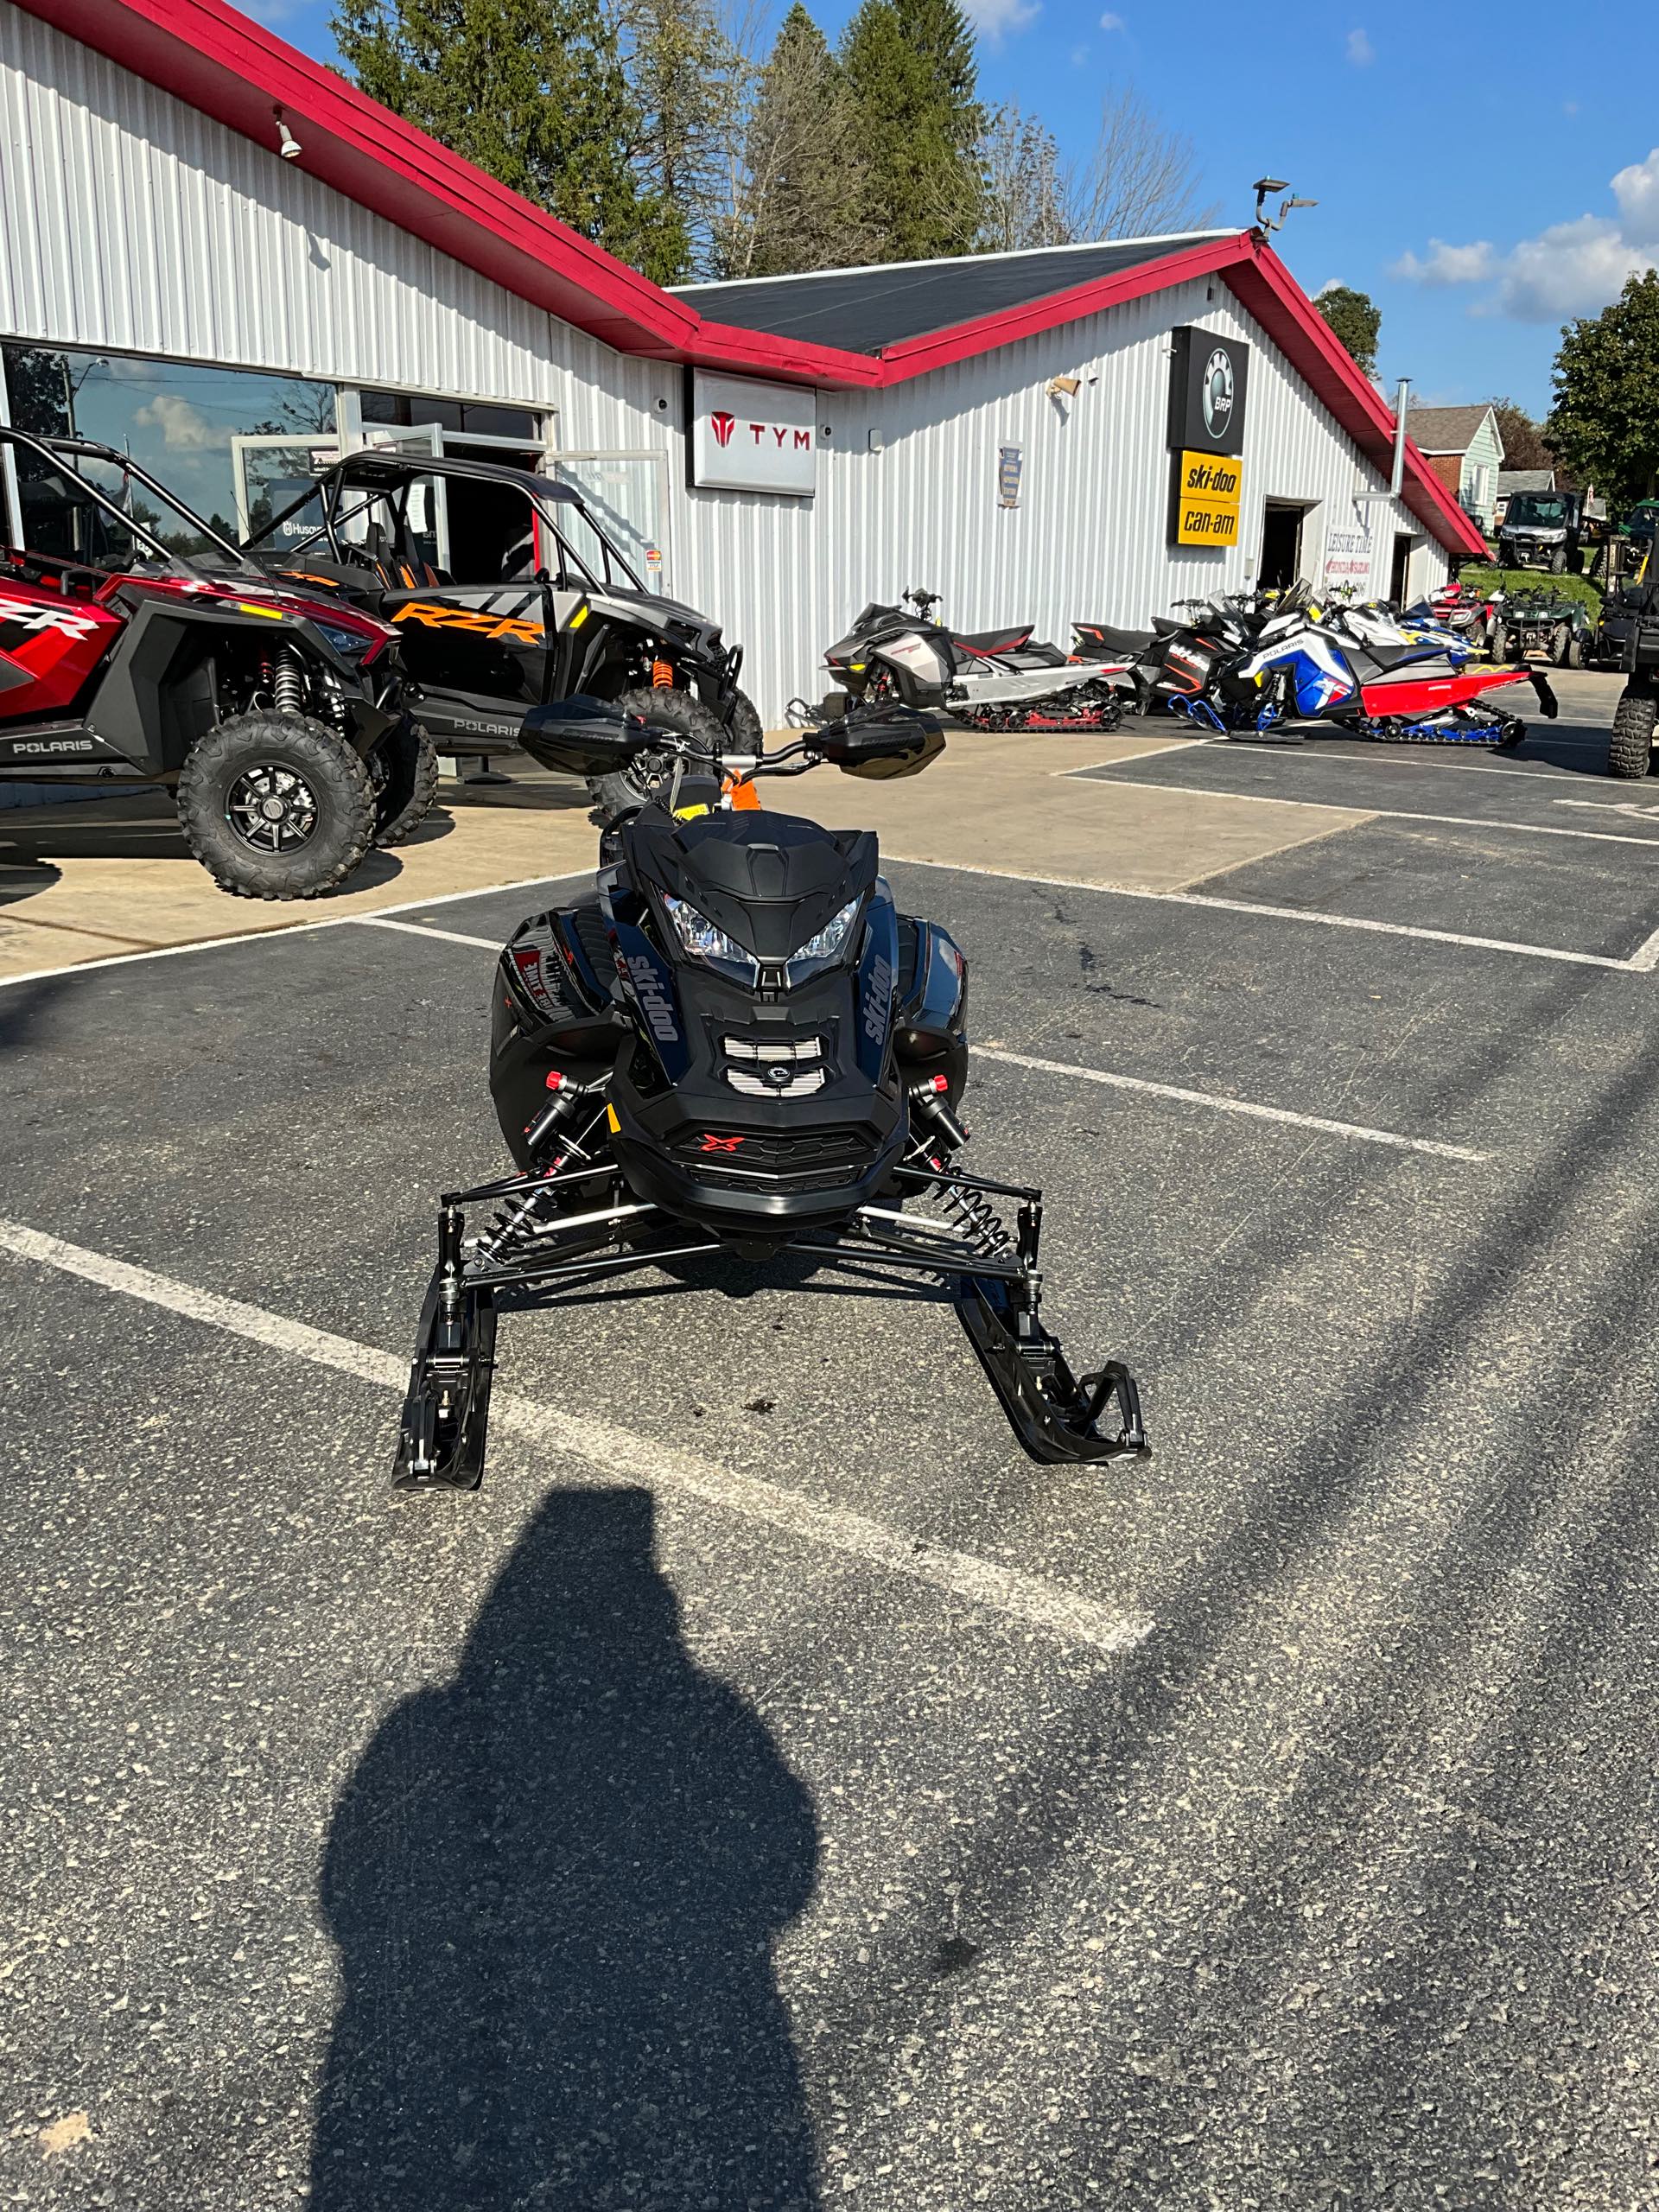 2023 Ski-Doo Renegade X-RS 900 ACE Turbo R at Leisure Time Powersports of Corry